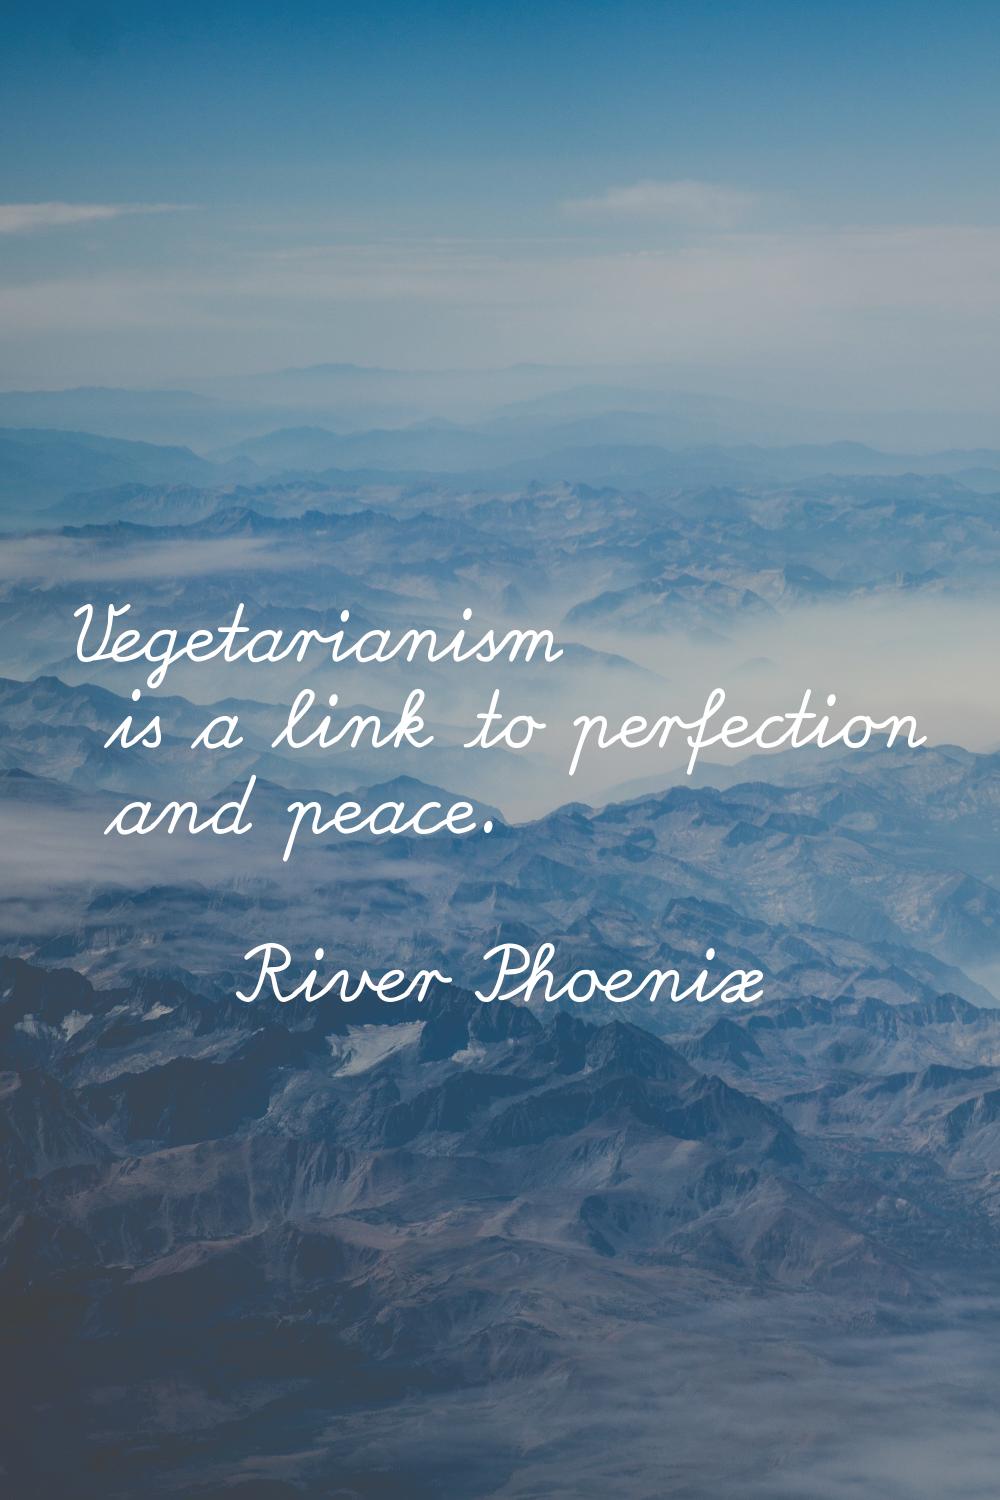 Vegetarianism is a link to perfection and peace.